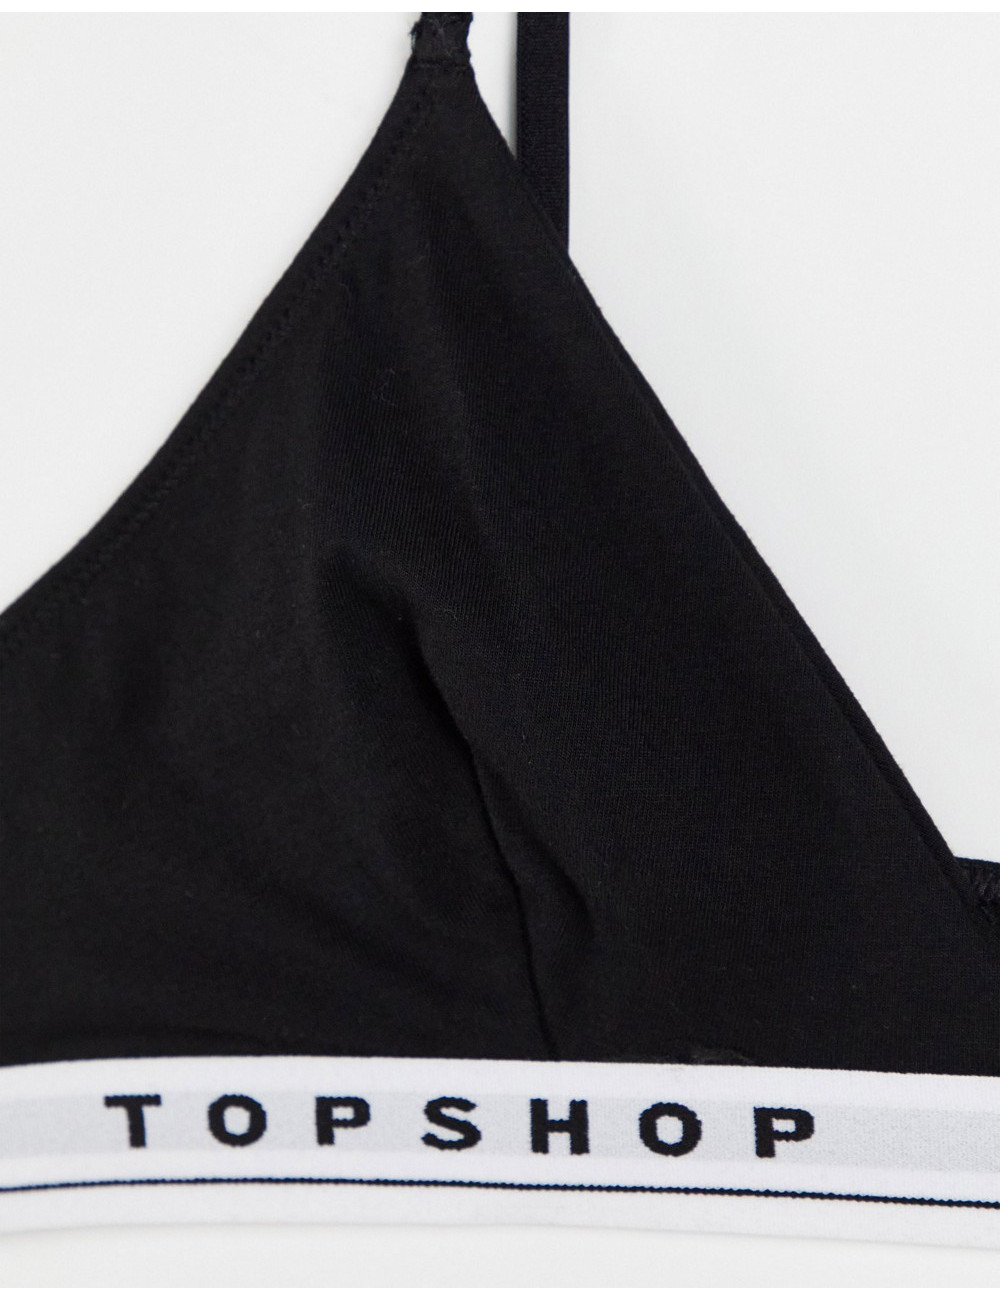 Topshop branded triangle...